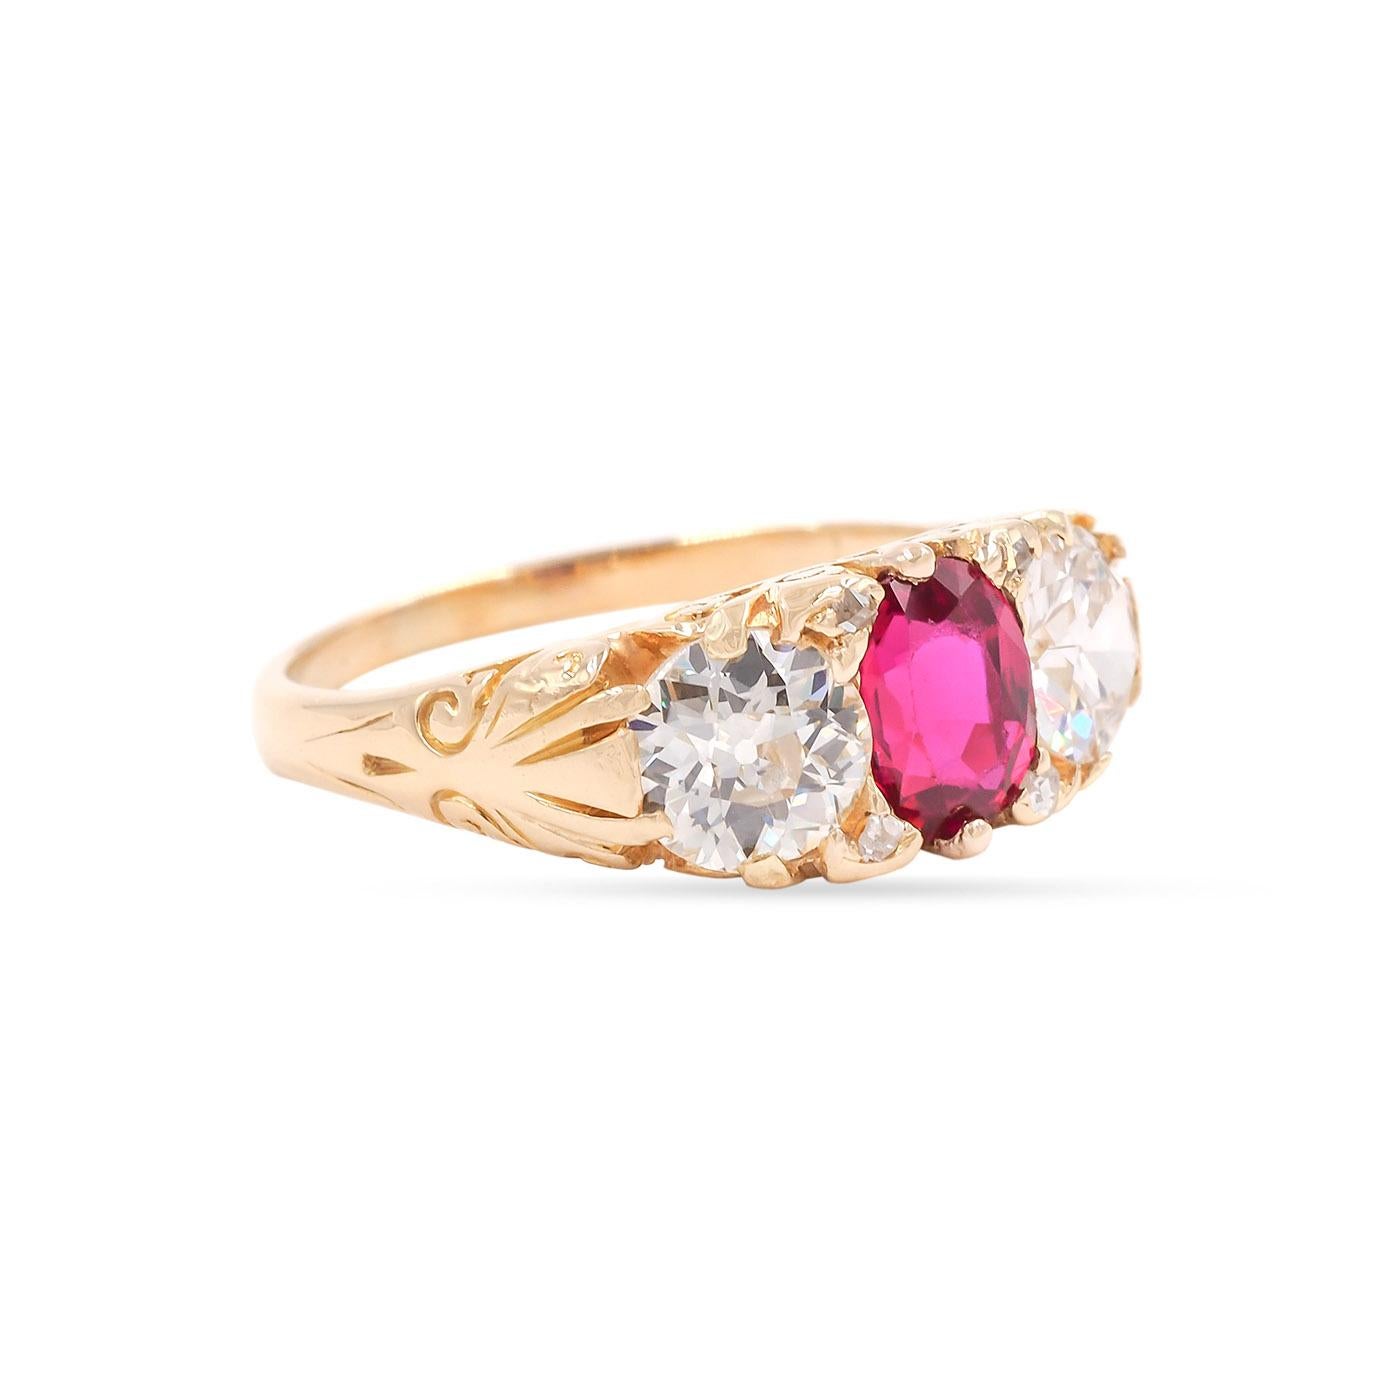 Edwardian era 0.91 Carat Oval Cut Ruby & Old European Cut Diamond 3-Stone Ring composed of 18k yellow gold. The center 0.91 carat Oval Cut ruby is Non-Heat Treated and flanked by two Old European Cut diamonds weighing approximately 1.21 carats in